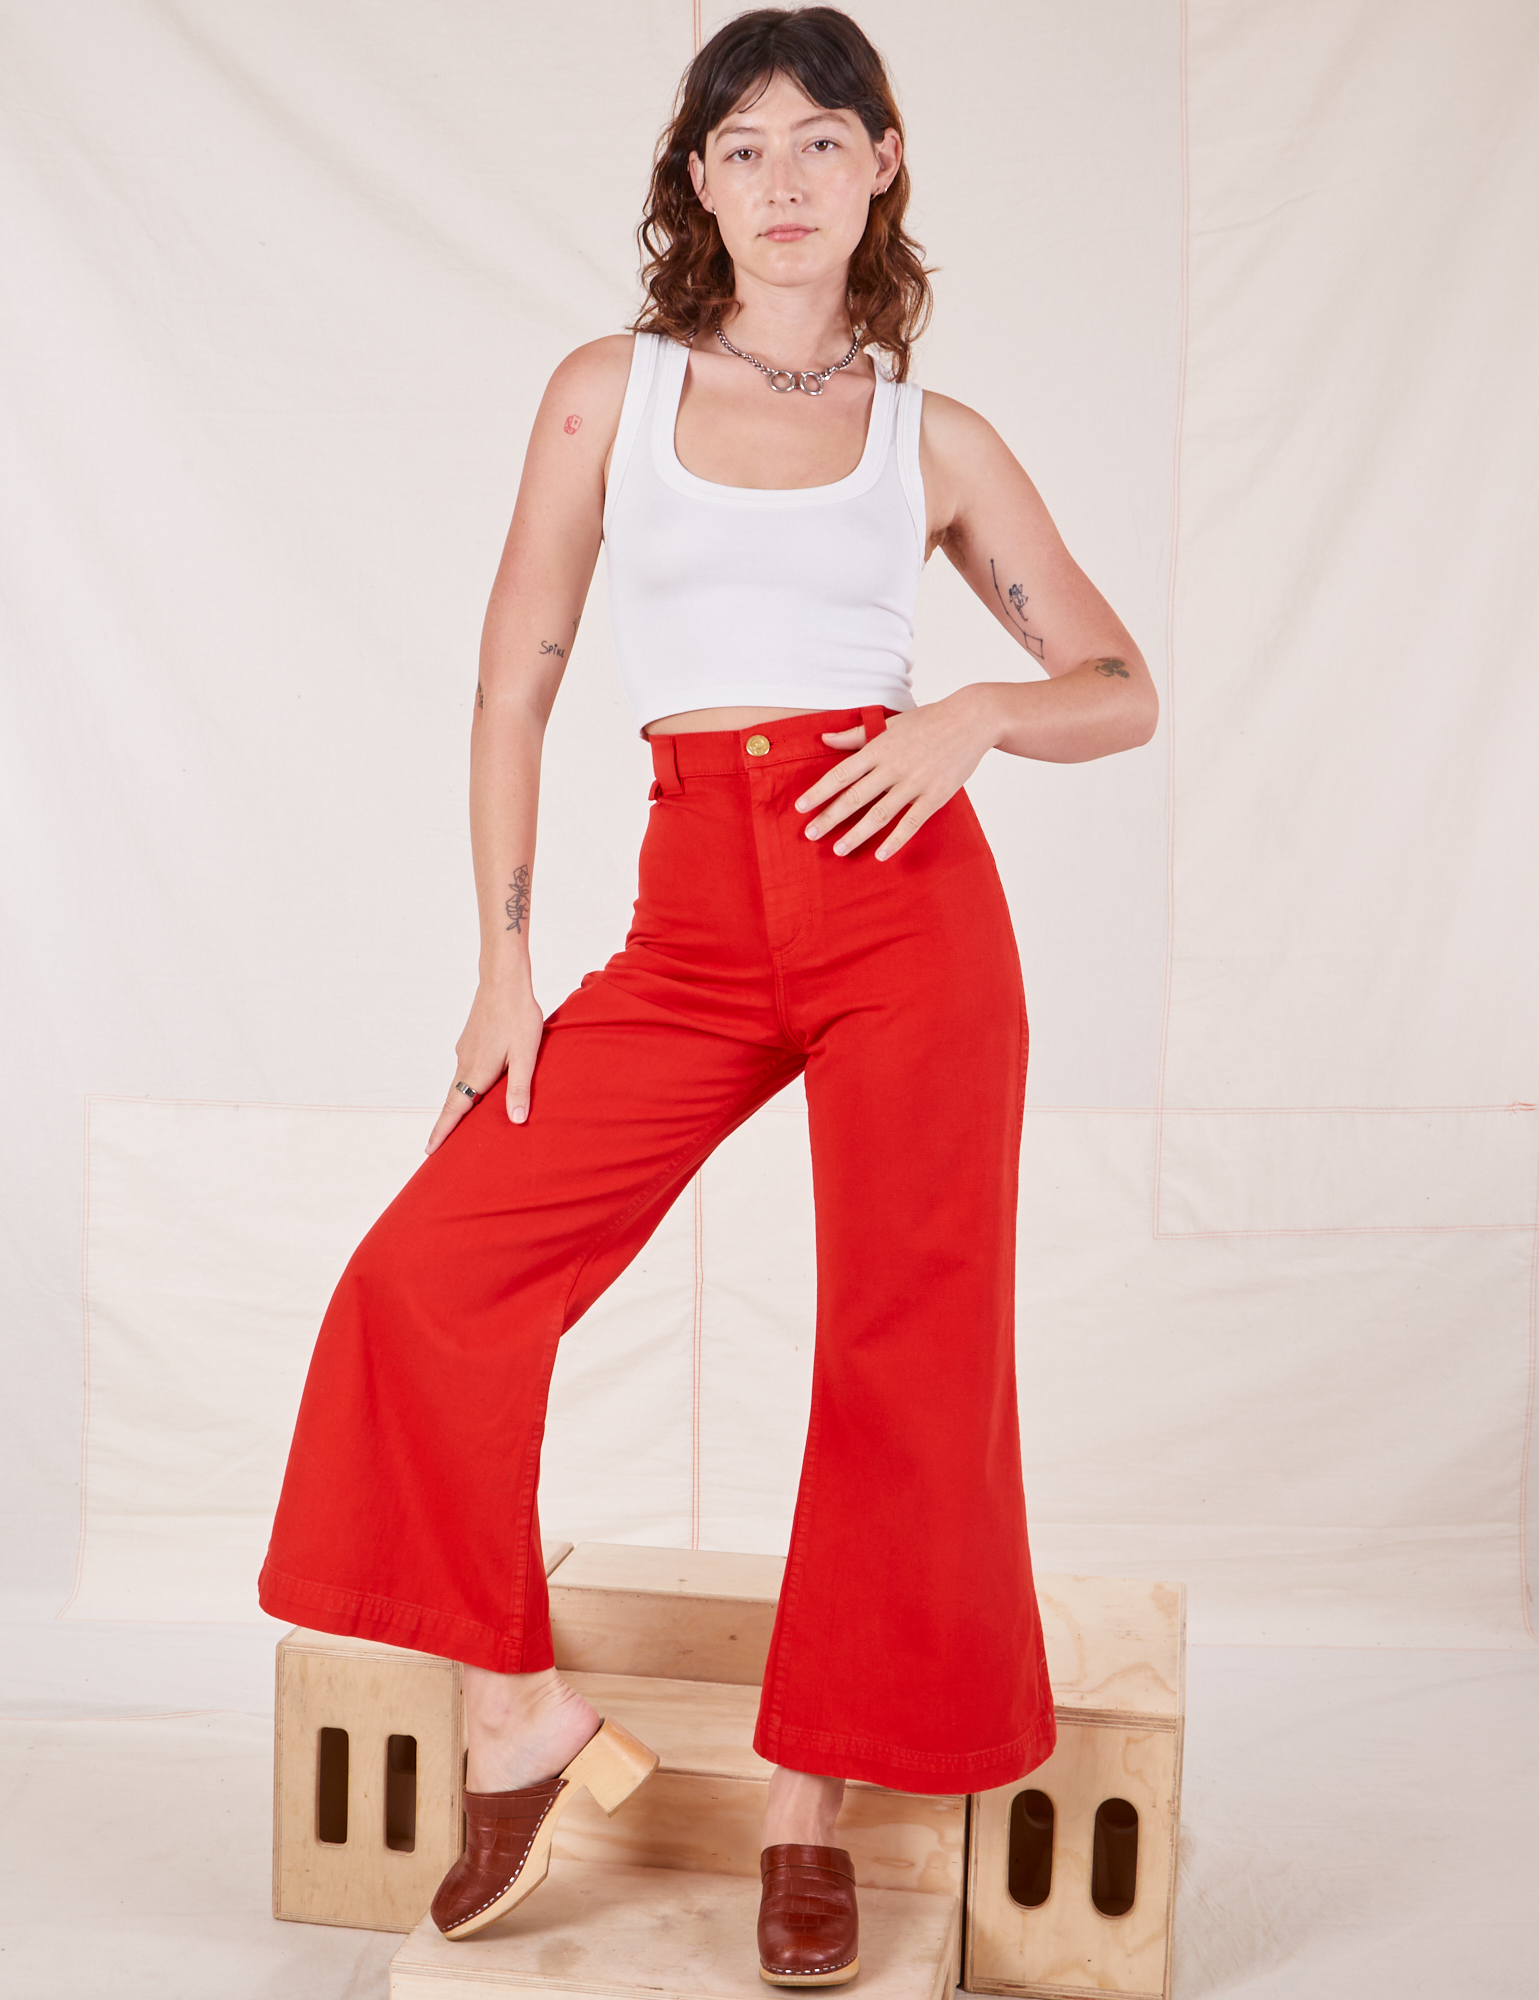 Alex is 5'8" and wearing XXS Bell Bottoms in Mustang Red paired with vintage off-white Cropped Tank Top